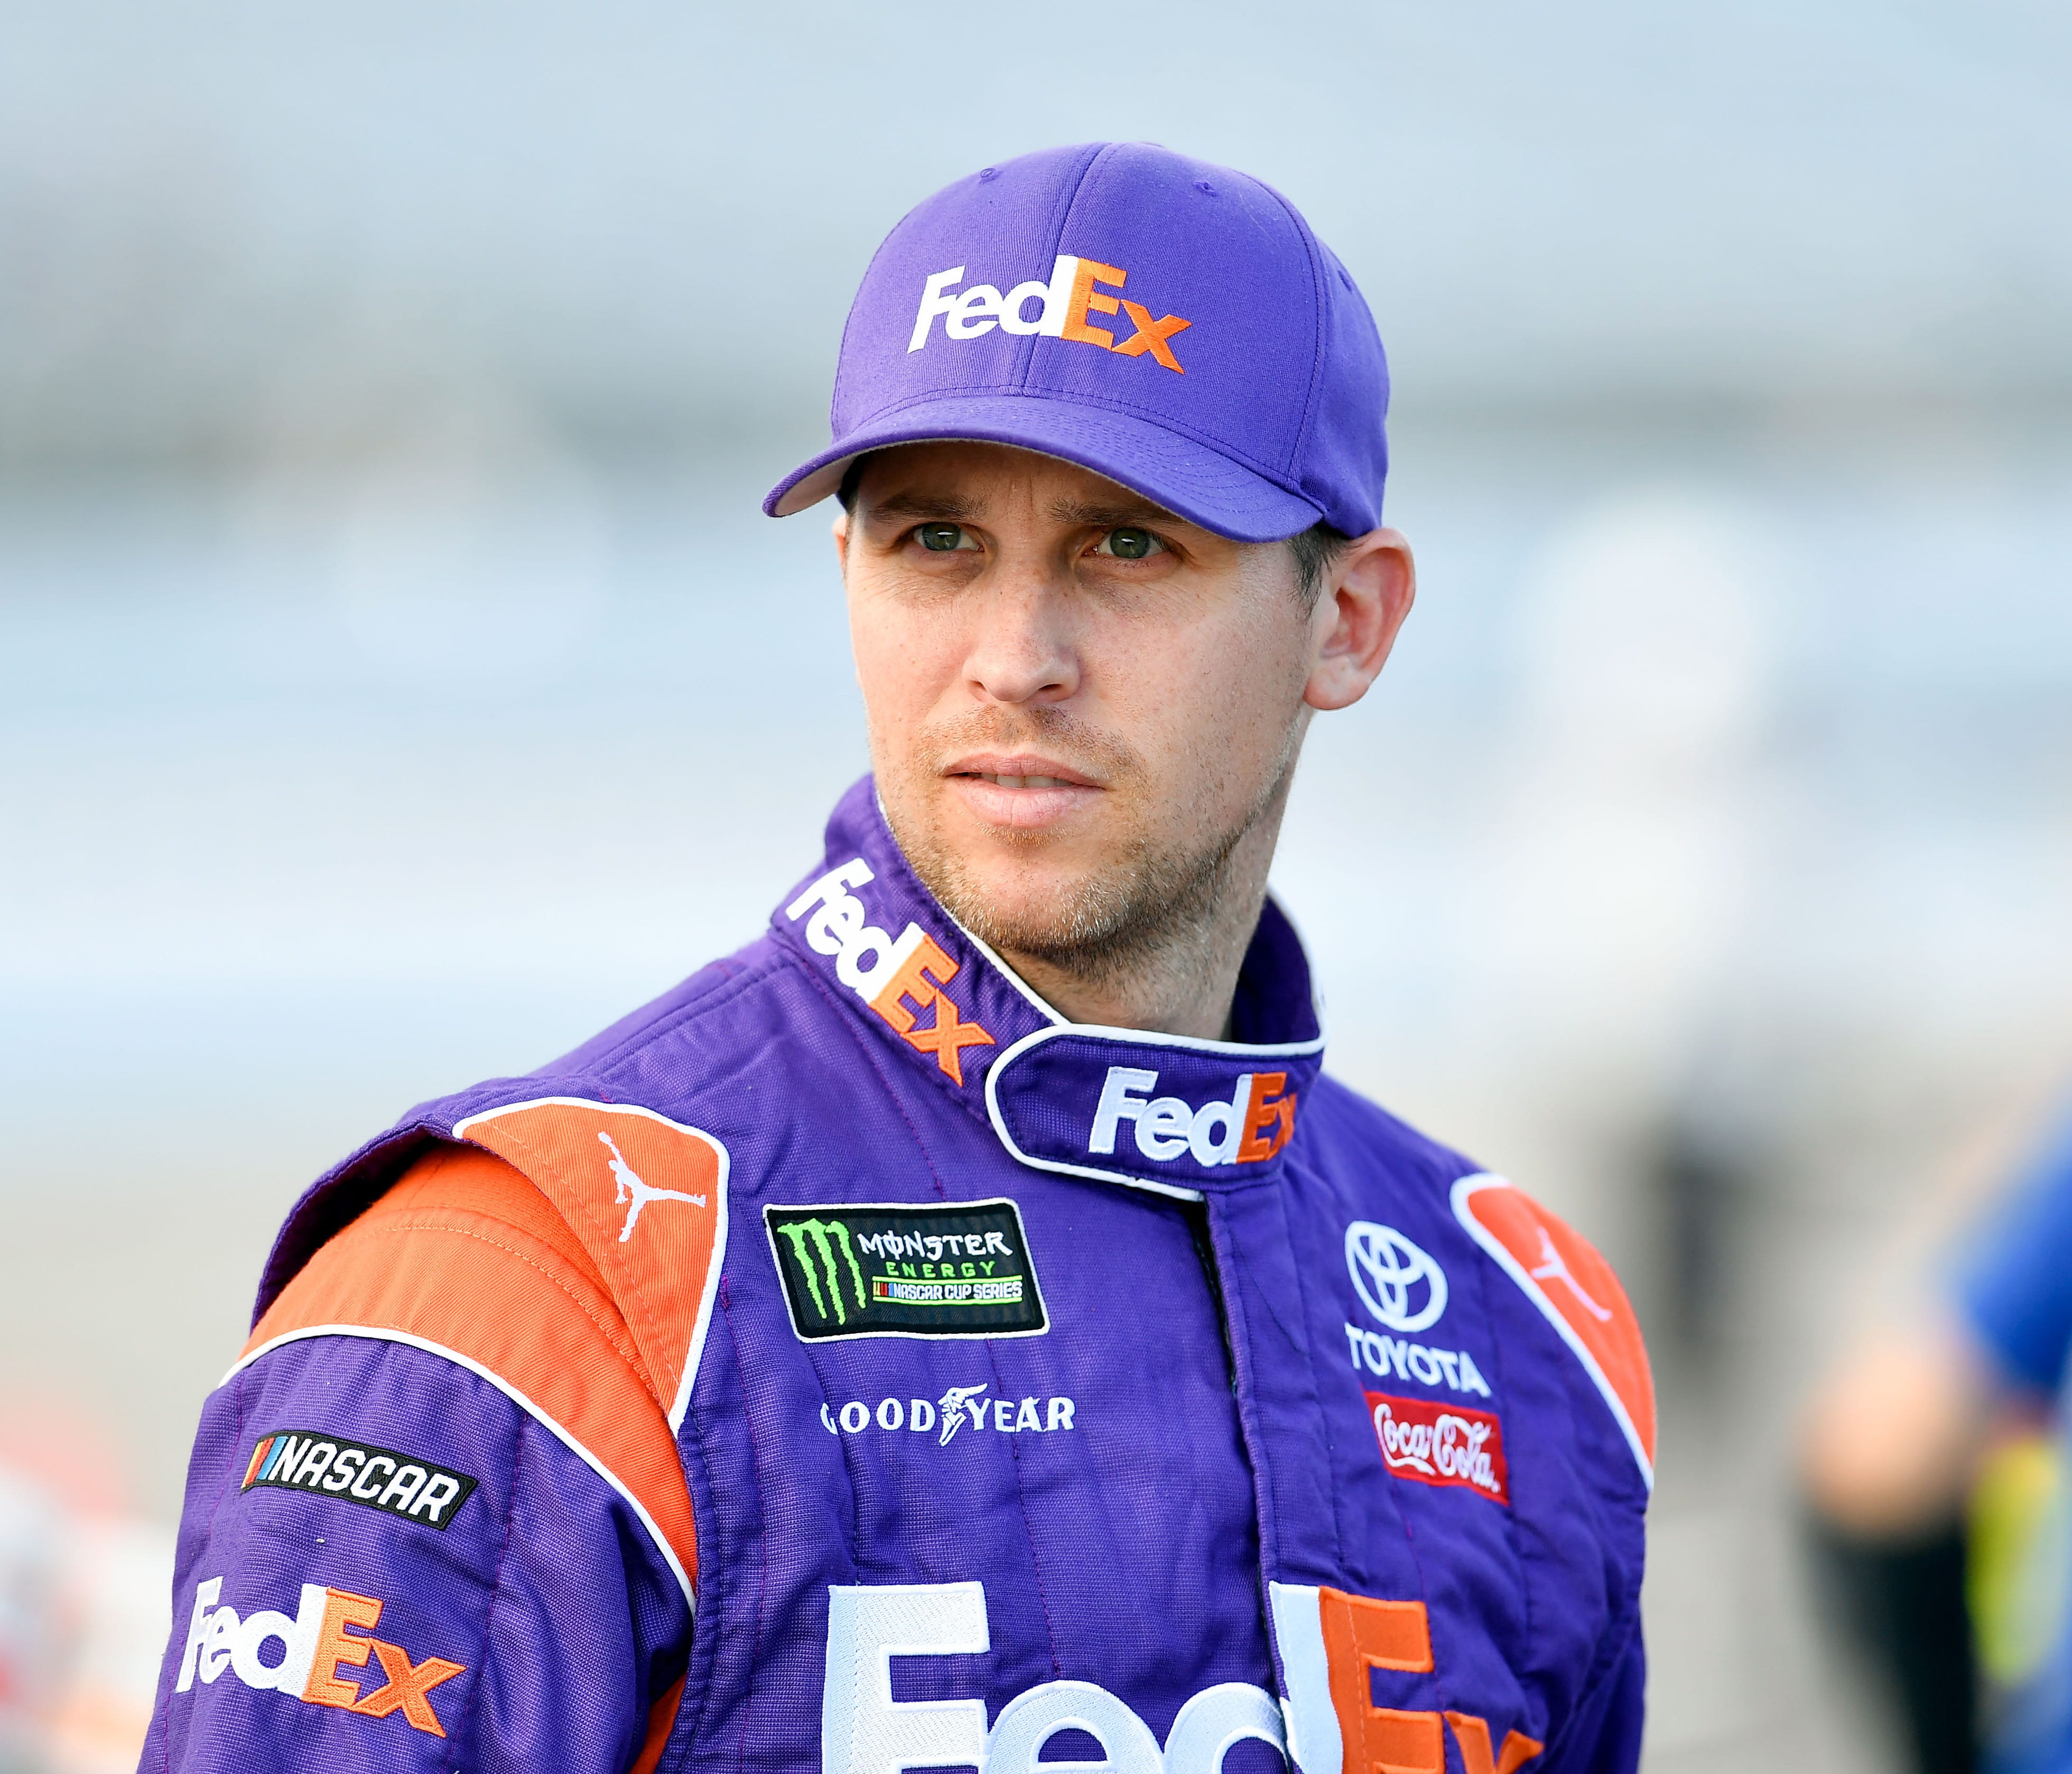 Sep 22, 2017; Loudon, NH, USA; Monster Energy NASCAR Cup Series driver Denny Hamlin (11) stands on pit row during qualifying for the ISM Connect 300 at the New Hampshire Motor Speedway. Mandatory Credit: Brian Fluharty-USA TODAY Sports ORG XMIT: USAT